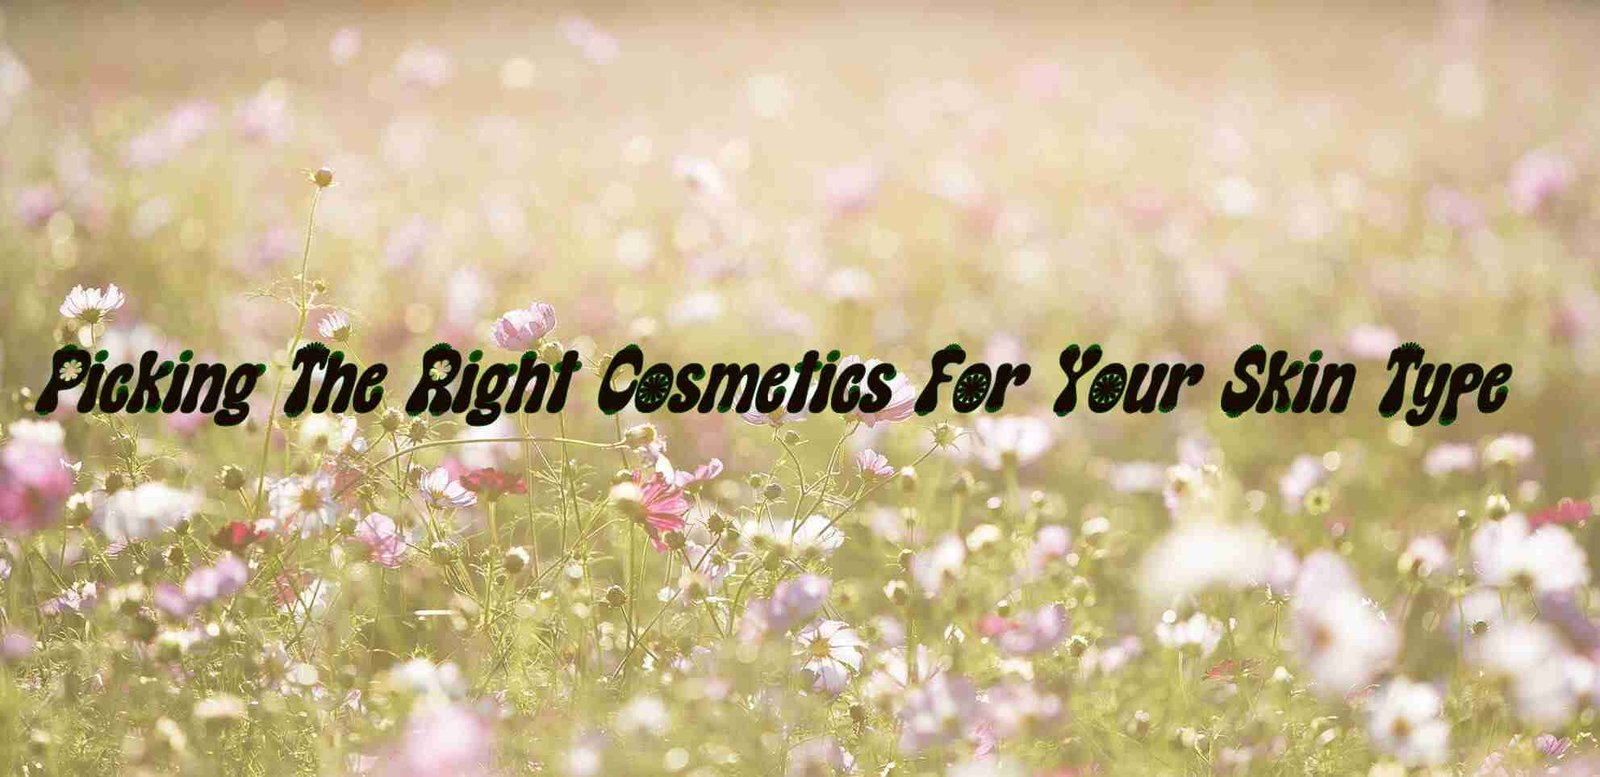 Tips For Choosing The Right Cosmetics For Your Skin Type